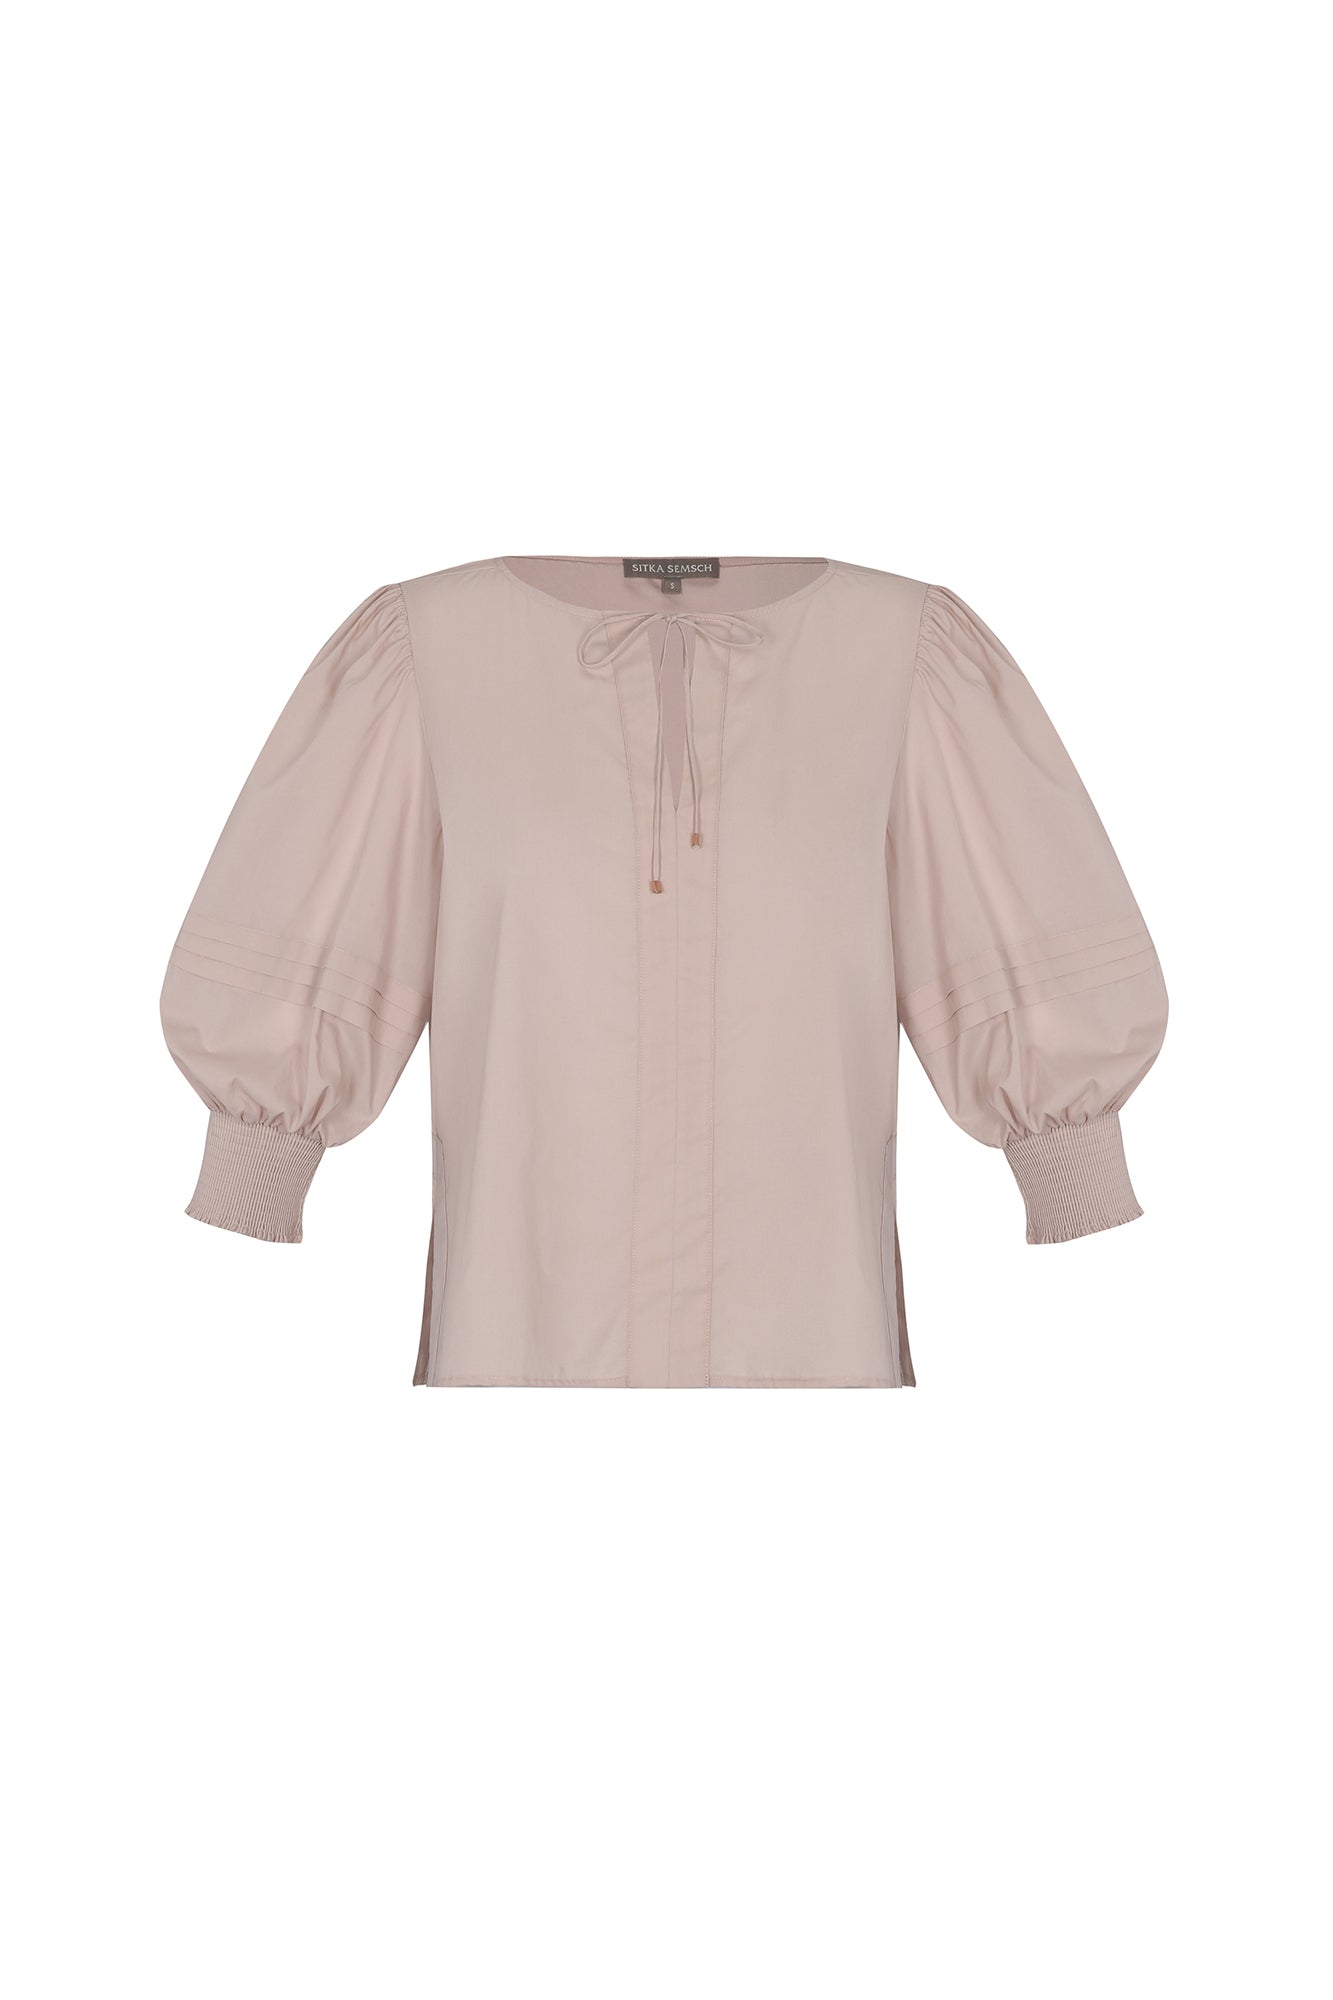 Giorgia Blouse in Brush - Bold and Girly Pima Cotton Blouse with Elasticized Sleeves and V-cut Neck